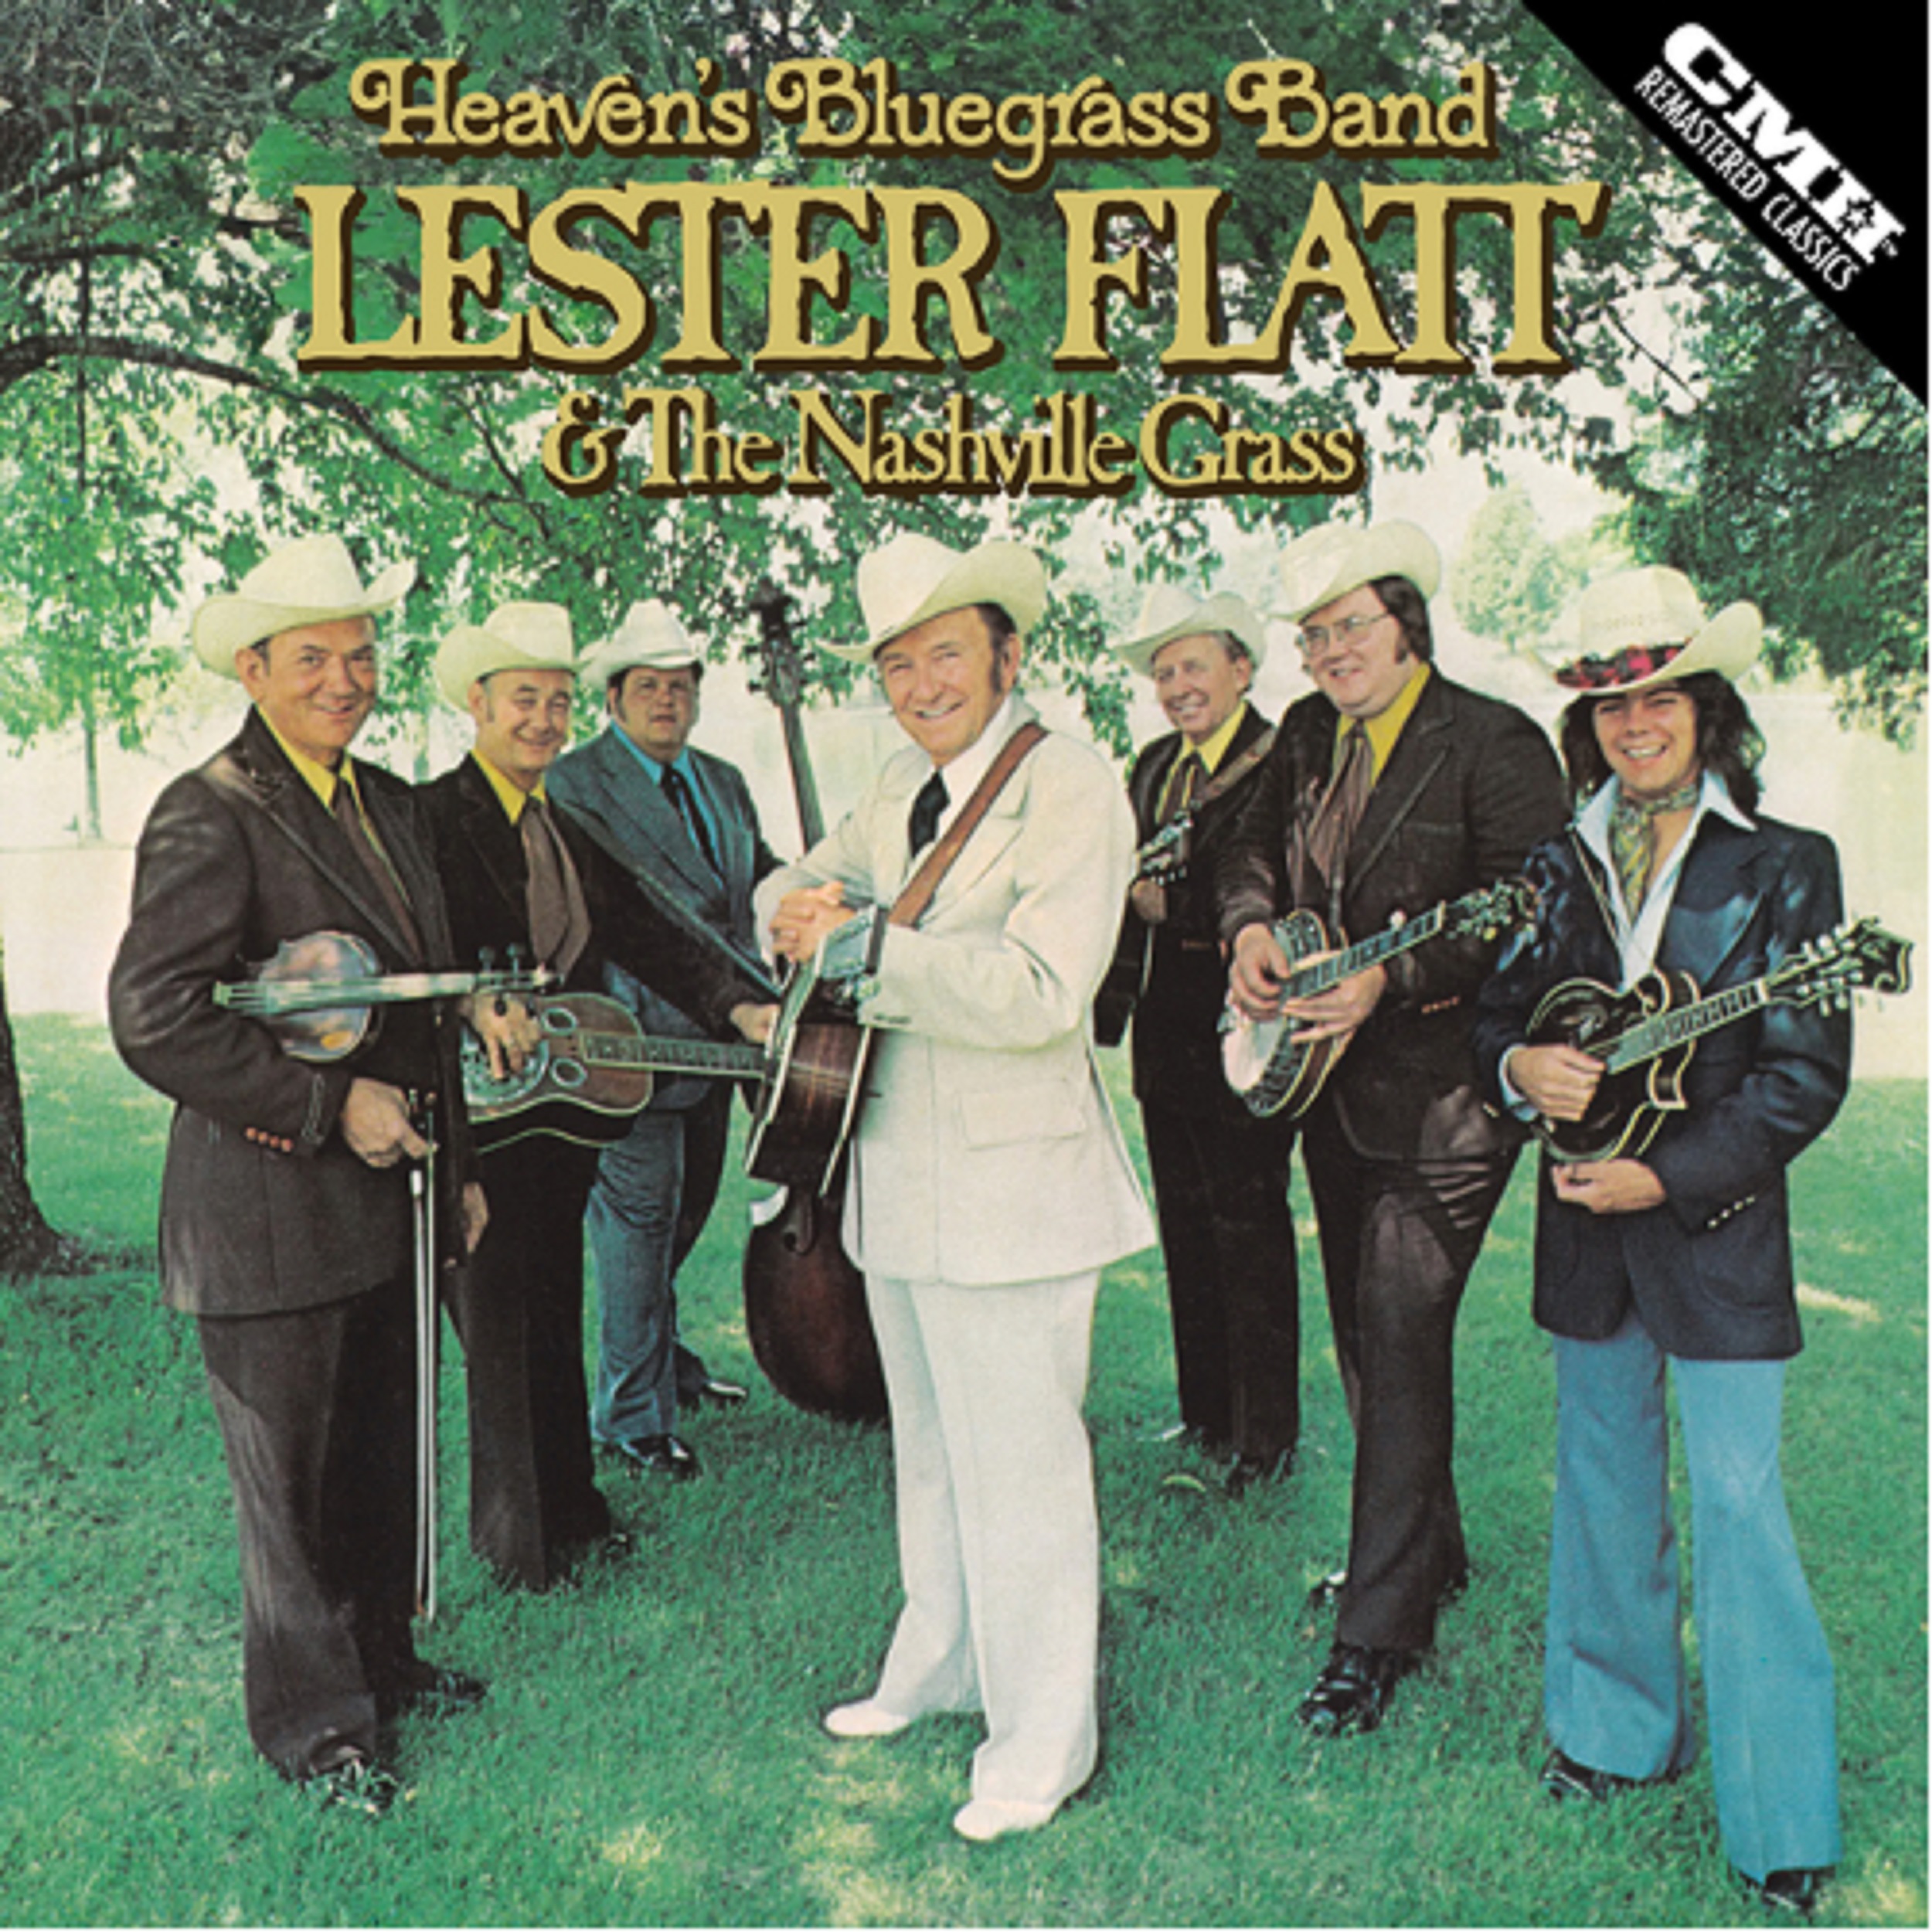 Lester Flatt & The Nashville Grass’ 'Heaven’s Bluegrass Band' Classic 1976 Album Available March 15 on CD & Digital; Single “Great Big Woman” Out Today (3/1)